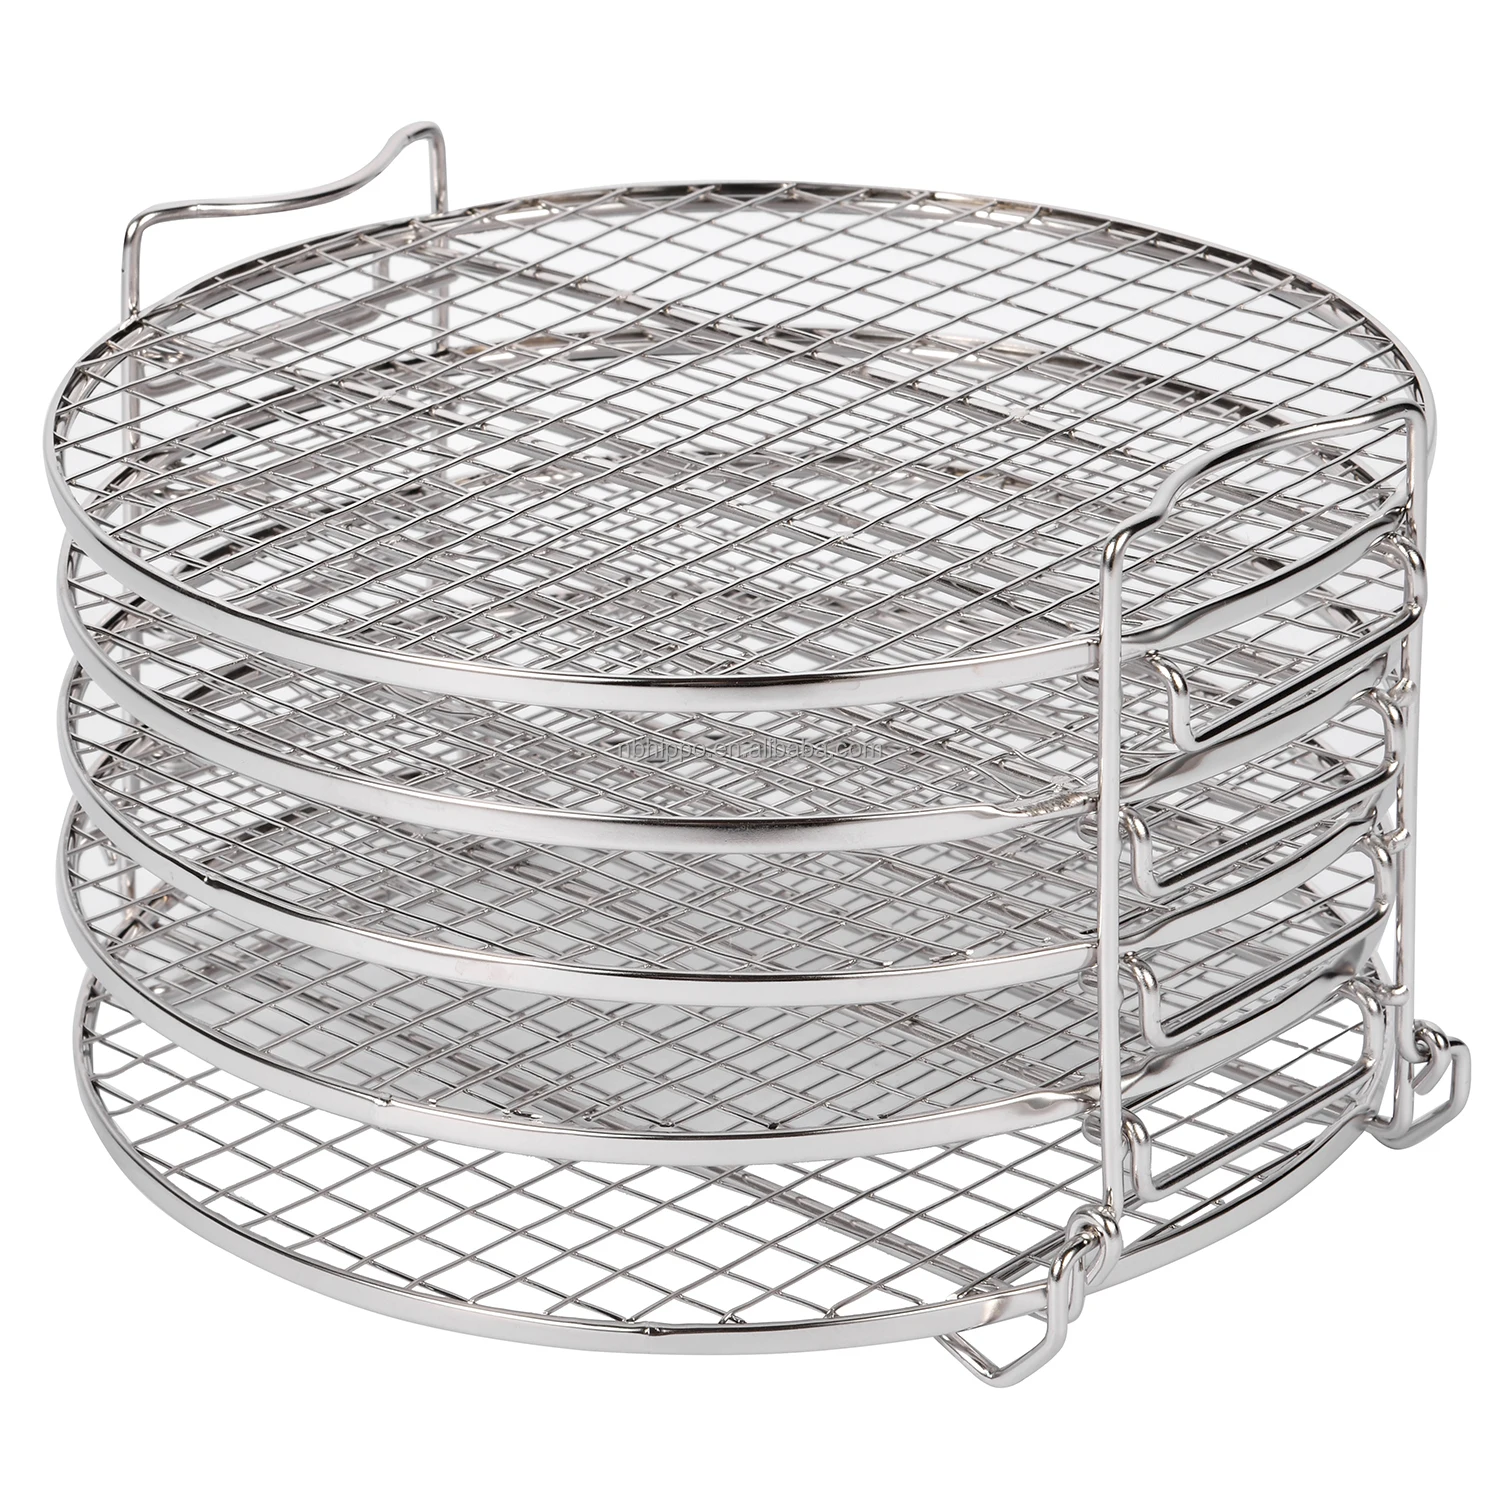 
spare parts for blender Stainless Steel 5 tiers Stackable rach dehydrator rack 